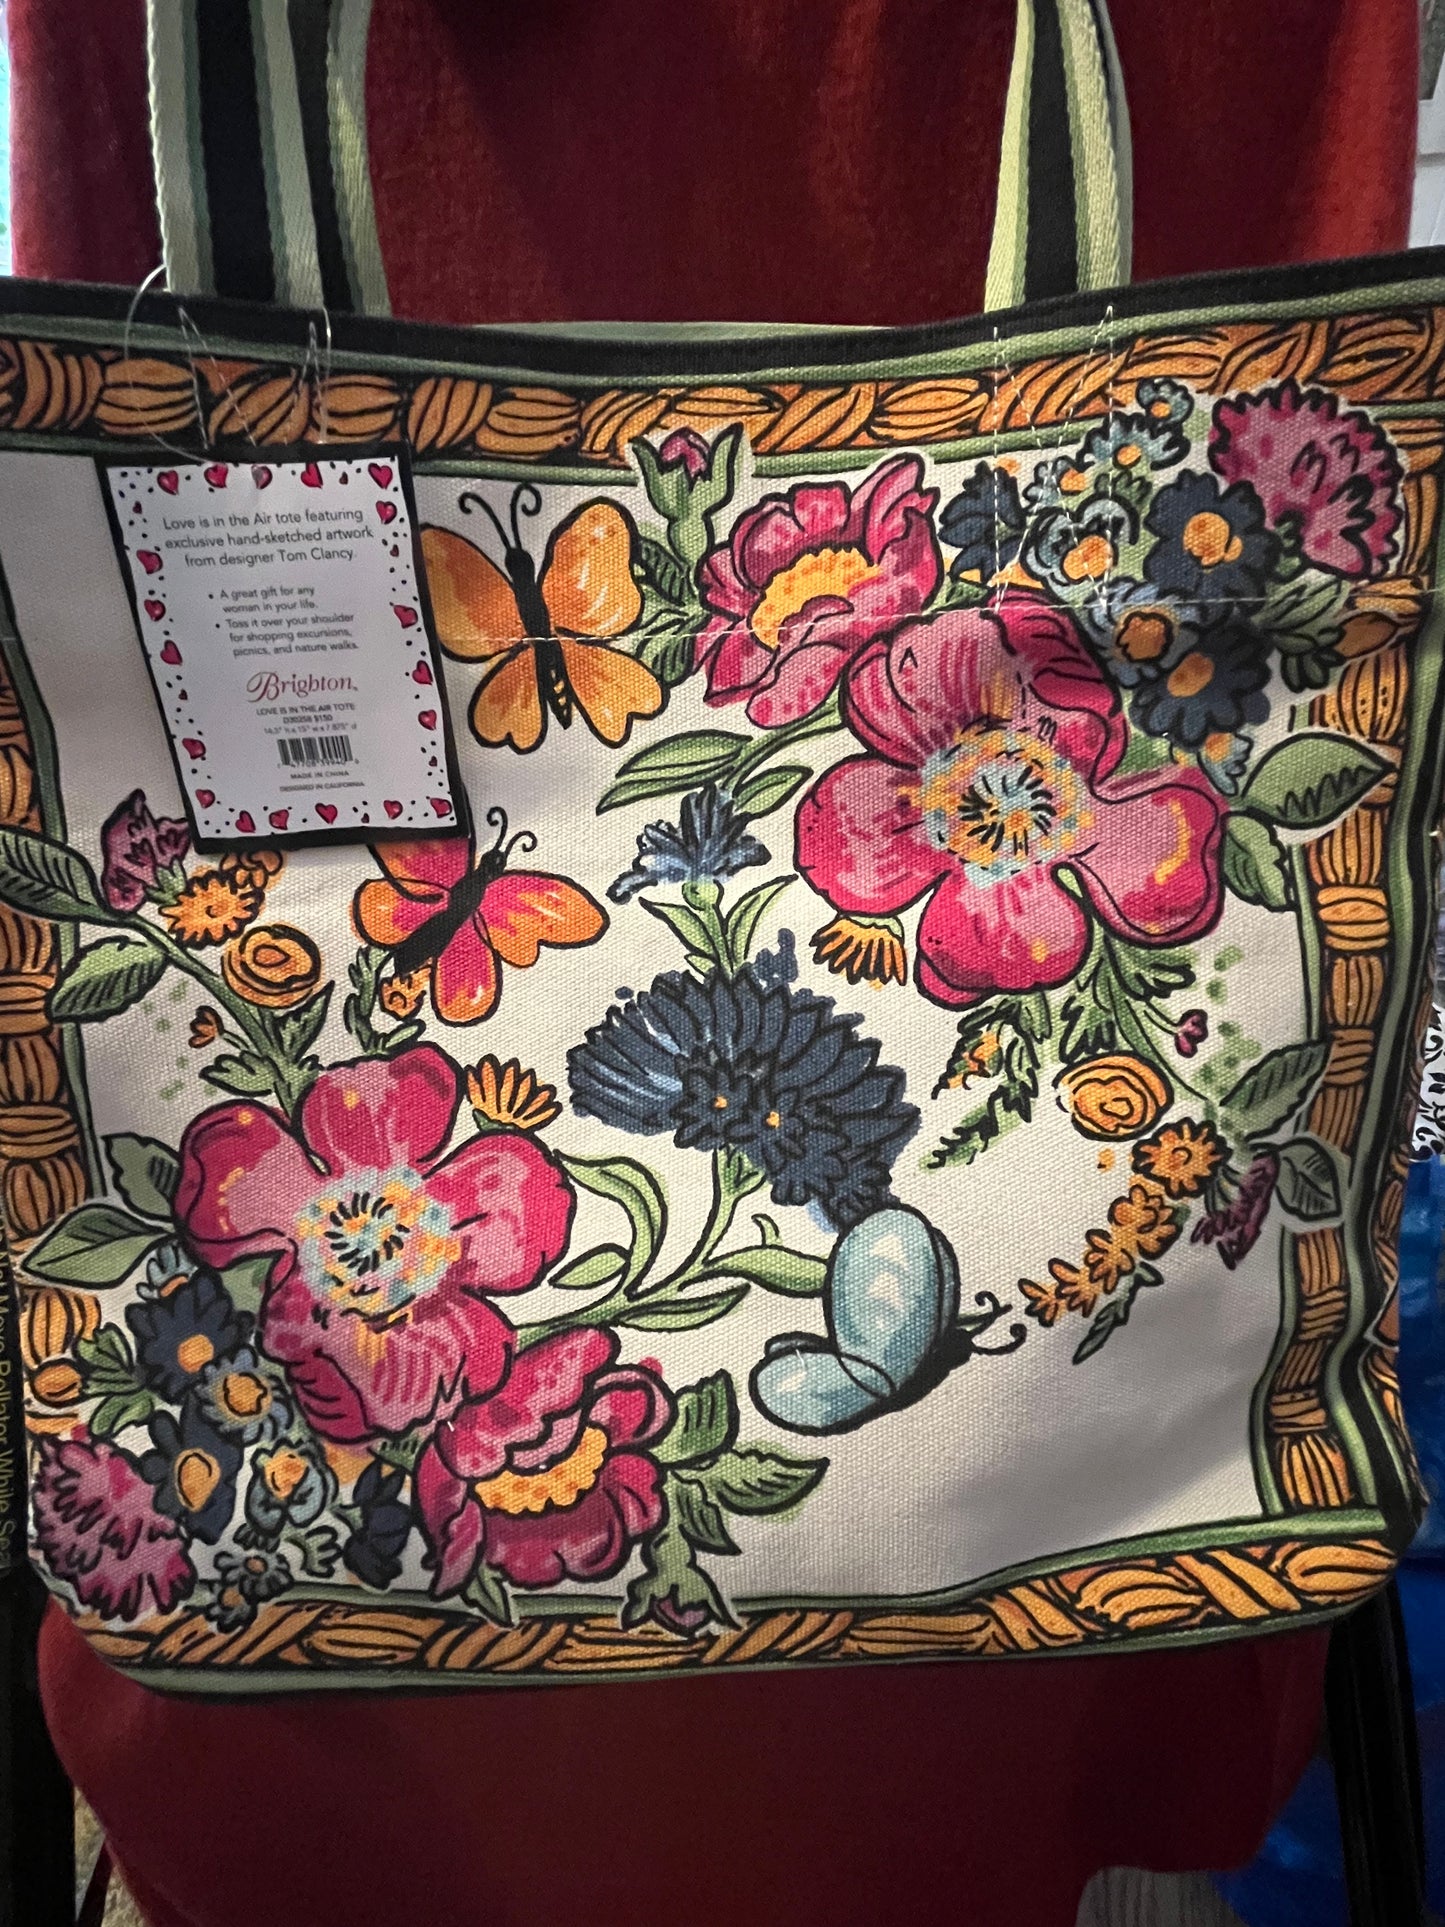 NWT Brighton "Love is in the Air" Canvas Tote